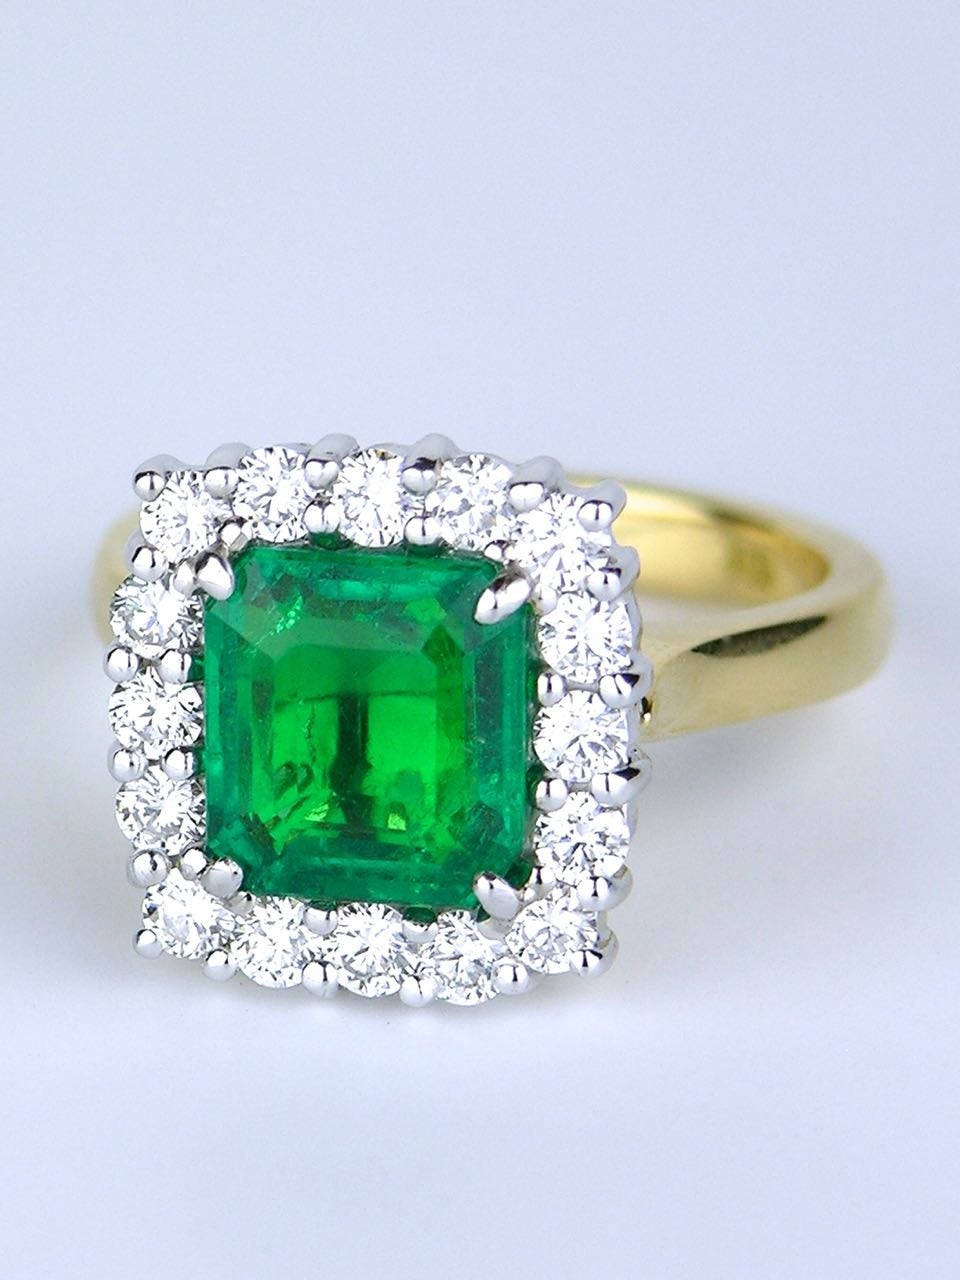 An emerald cut emerald of fine vivid green colour and medium clarity four claw set in 18ct white gold within a border of 16 round brilliant cut diamonds on an 18ct yellow gold shank 

- handmade mount 
- emerald 1=2.40cts natural, Columbian